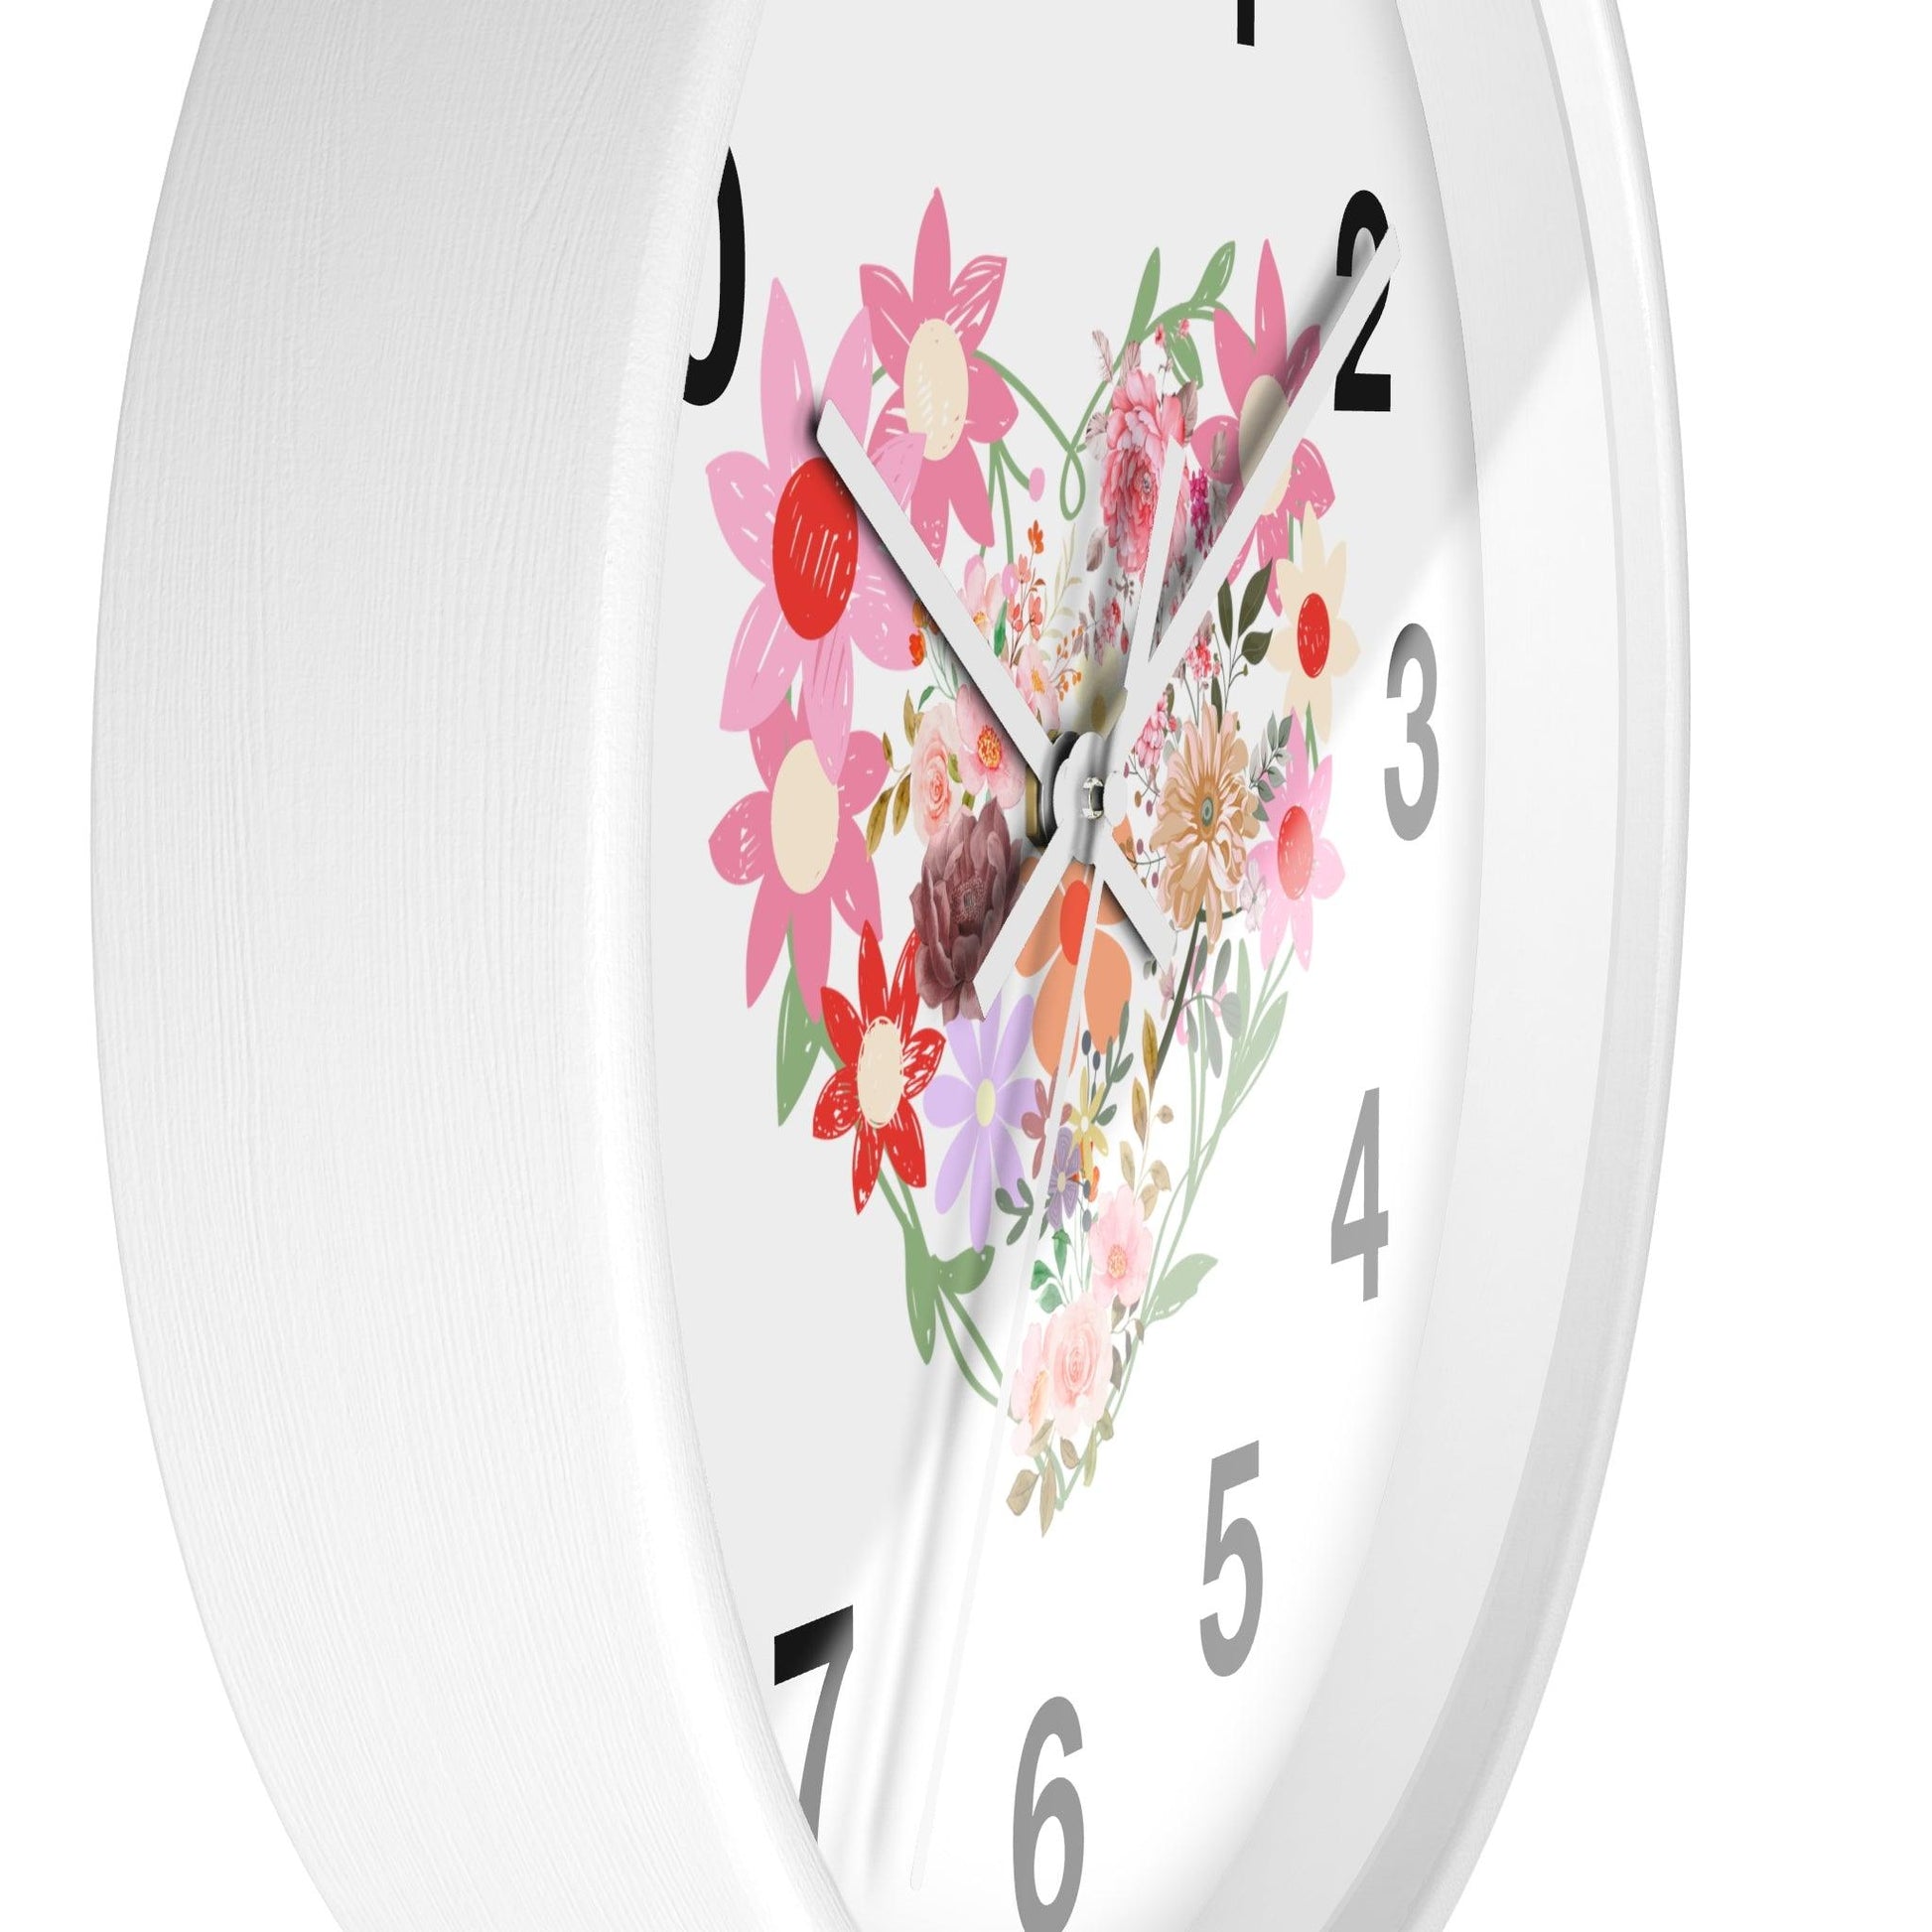 Flower wall clock, Flower Heart Wall clock, Floral Wall Clock, Home decor gift, House Warming gift, New Home Gift, Mom gift - Giftsmojo